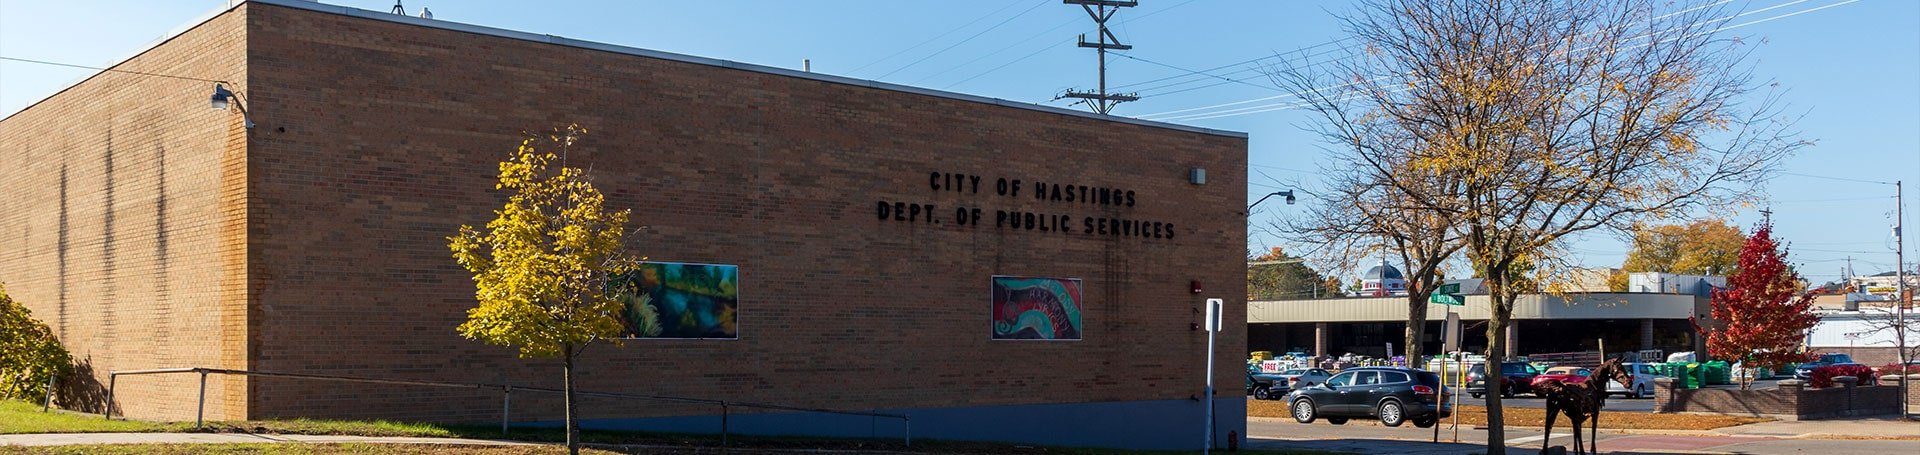 This is a photo of the Department of Public Services